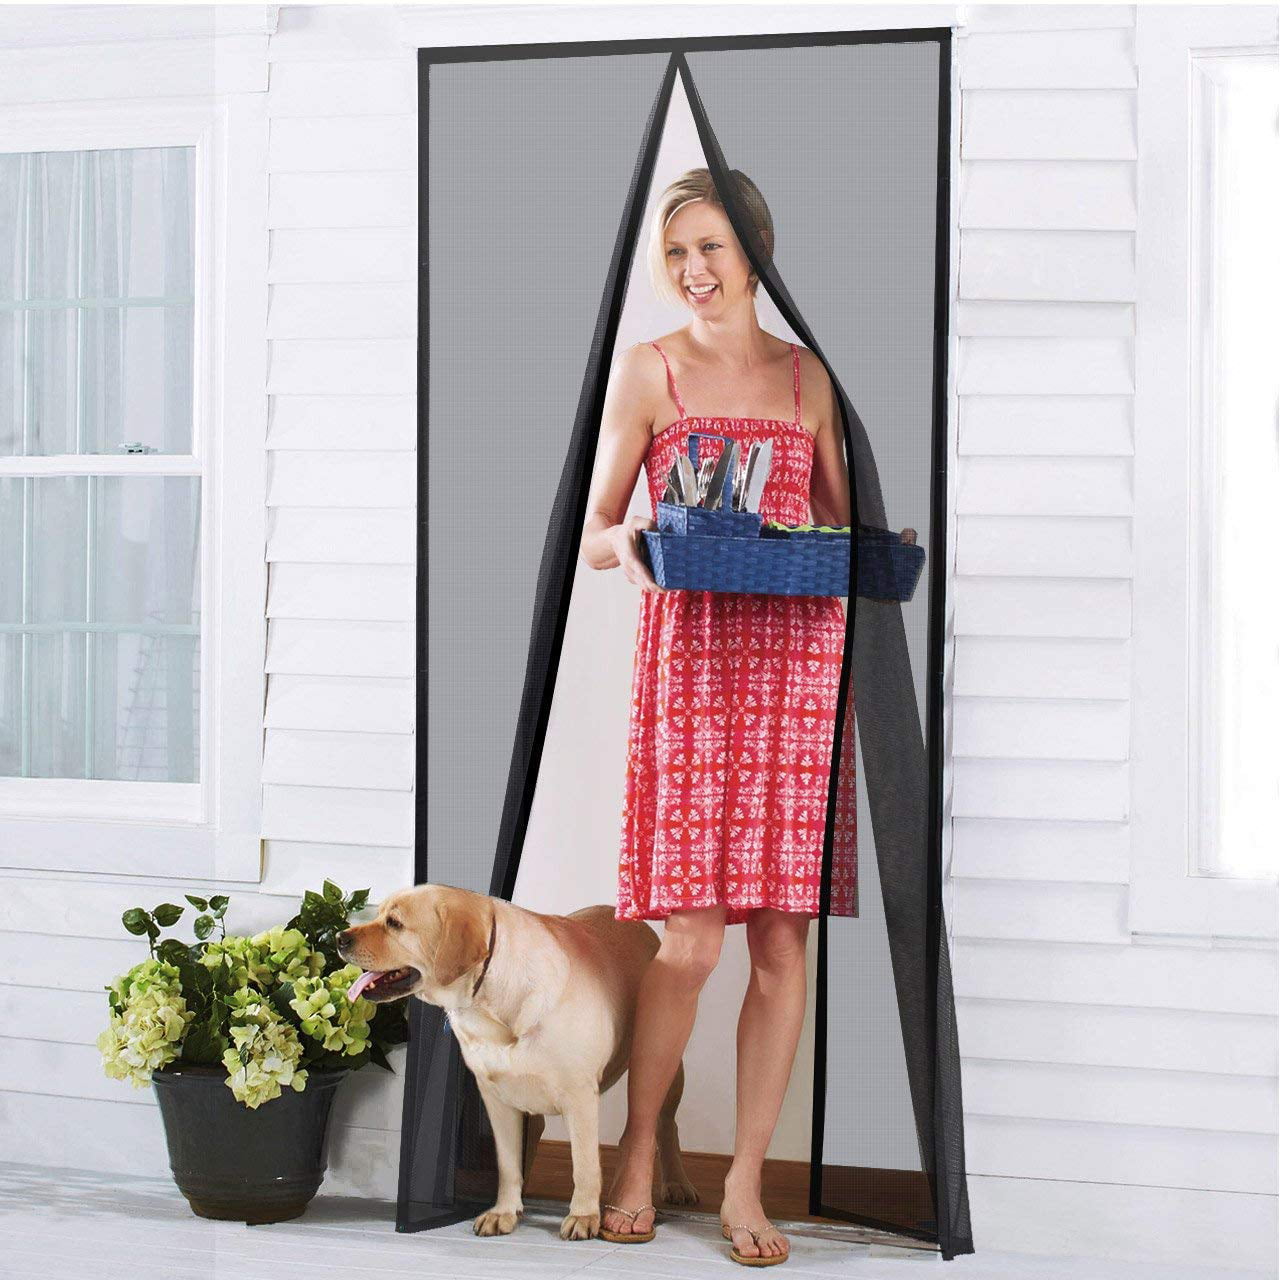 Heavy Duty Bug Mesh Curtain with Powerful Magnets and Full Magnetic Screen Door 